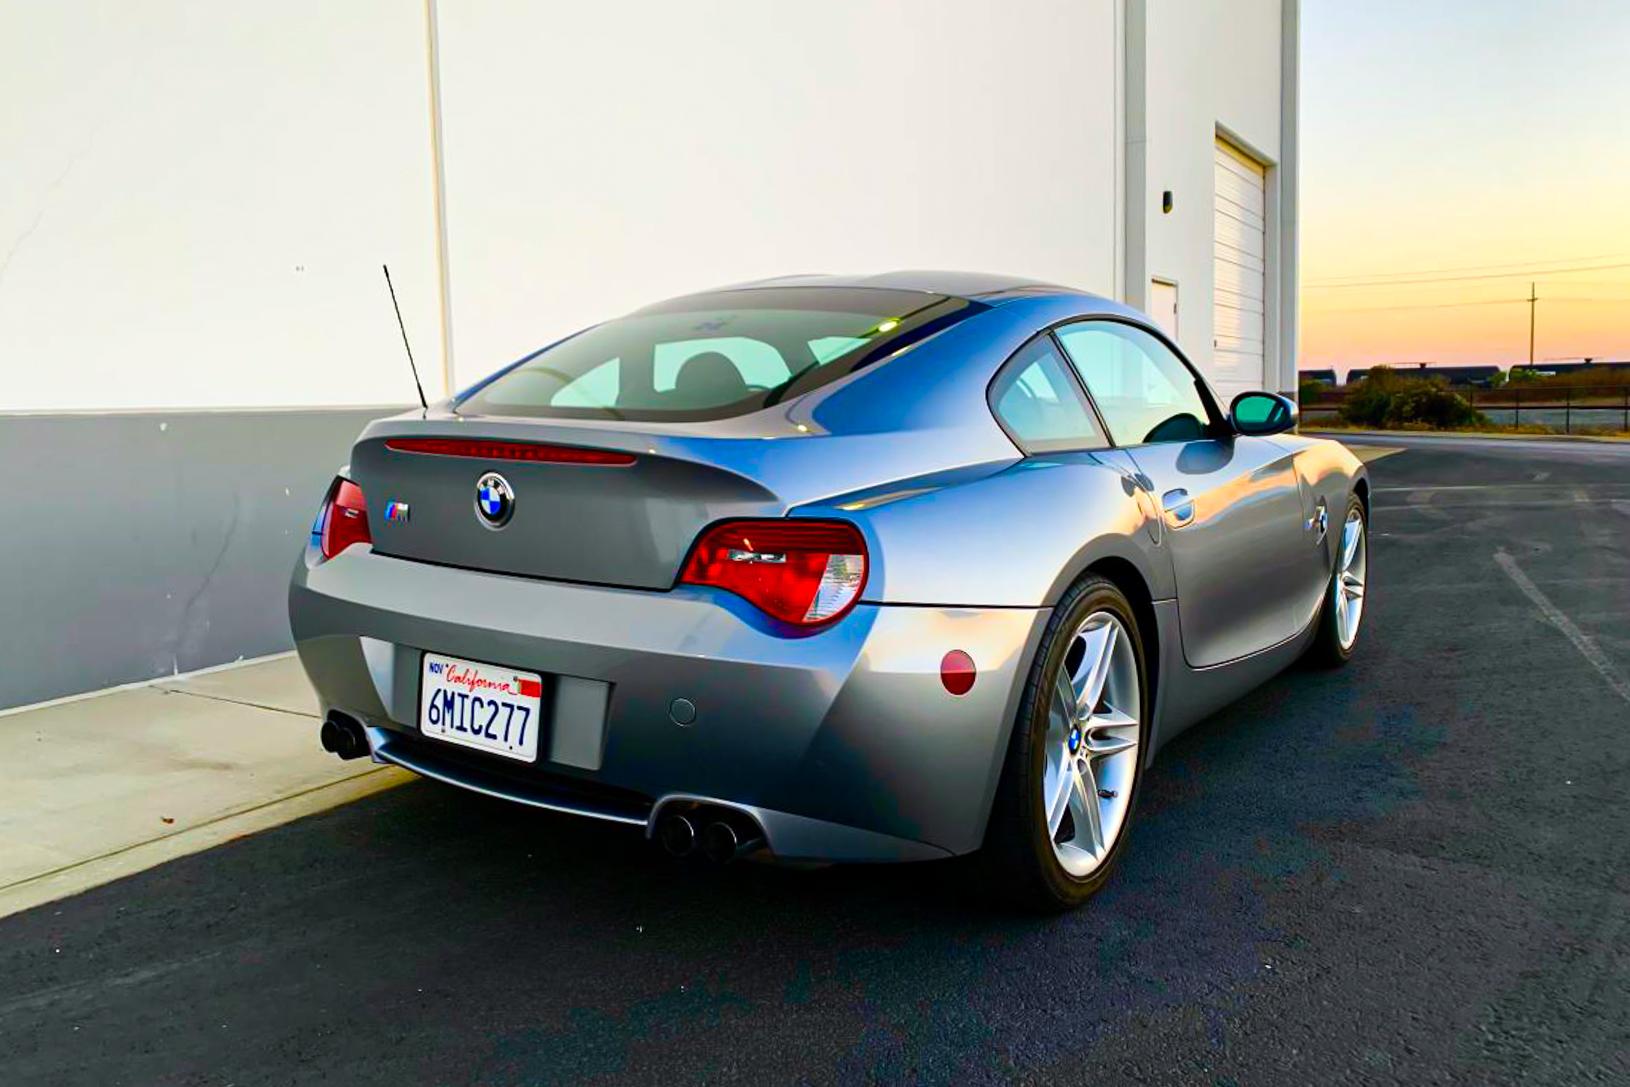 2007 BMW Z4 M Coupe | Built for Backroads